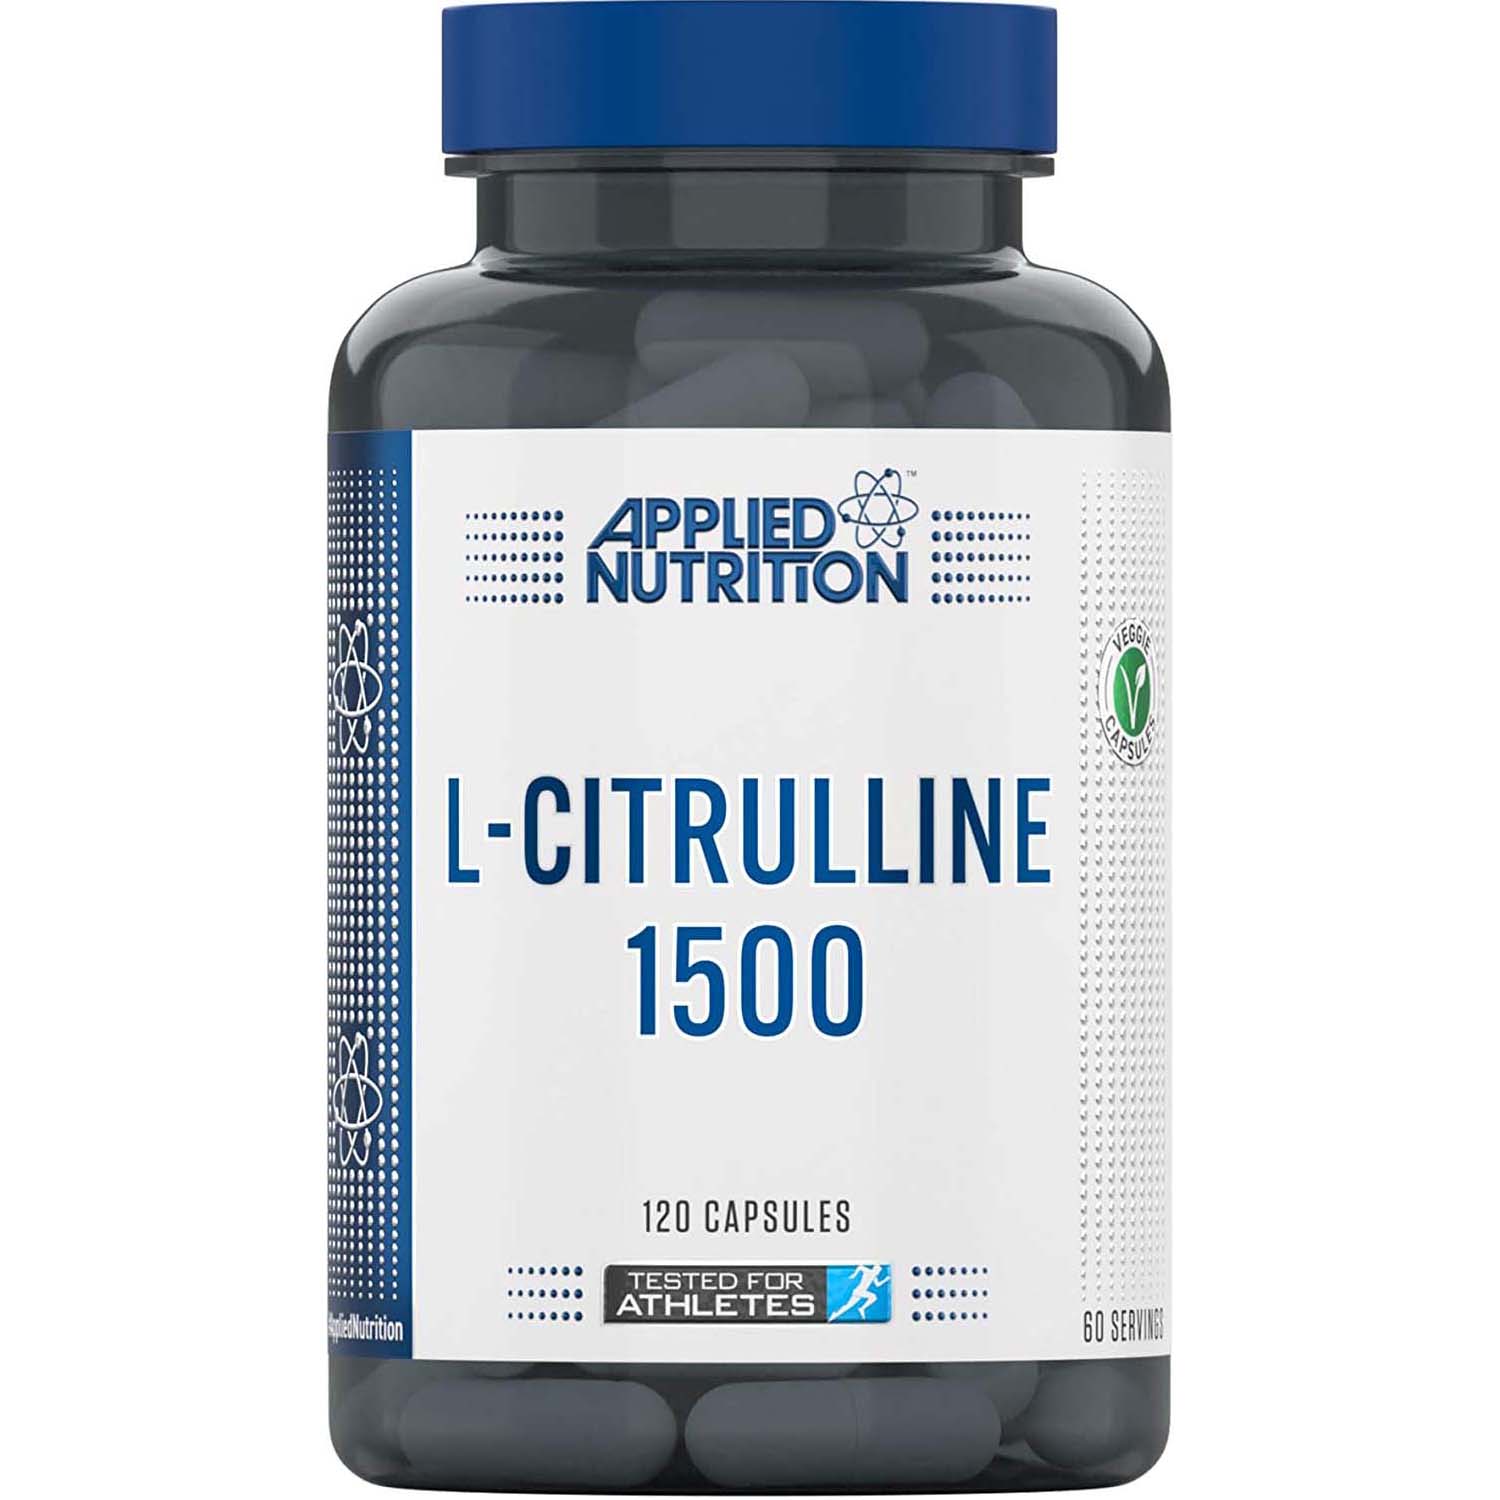 Applied Nutrition L-Citrulline 120 Capsules 1500 mg